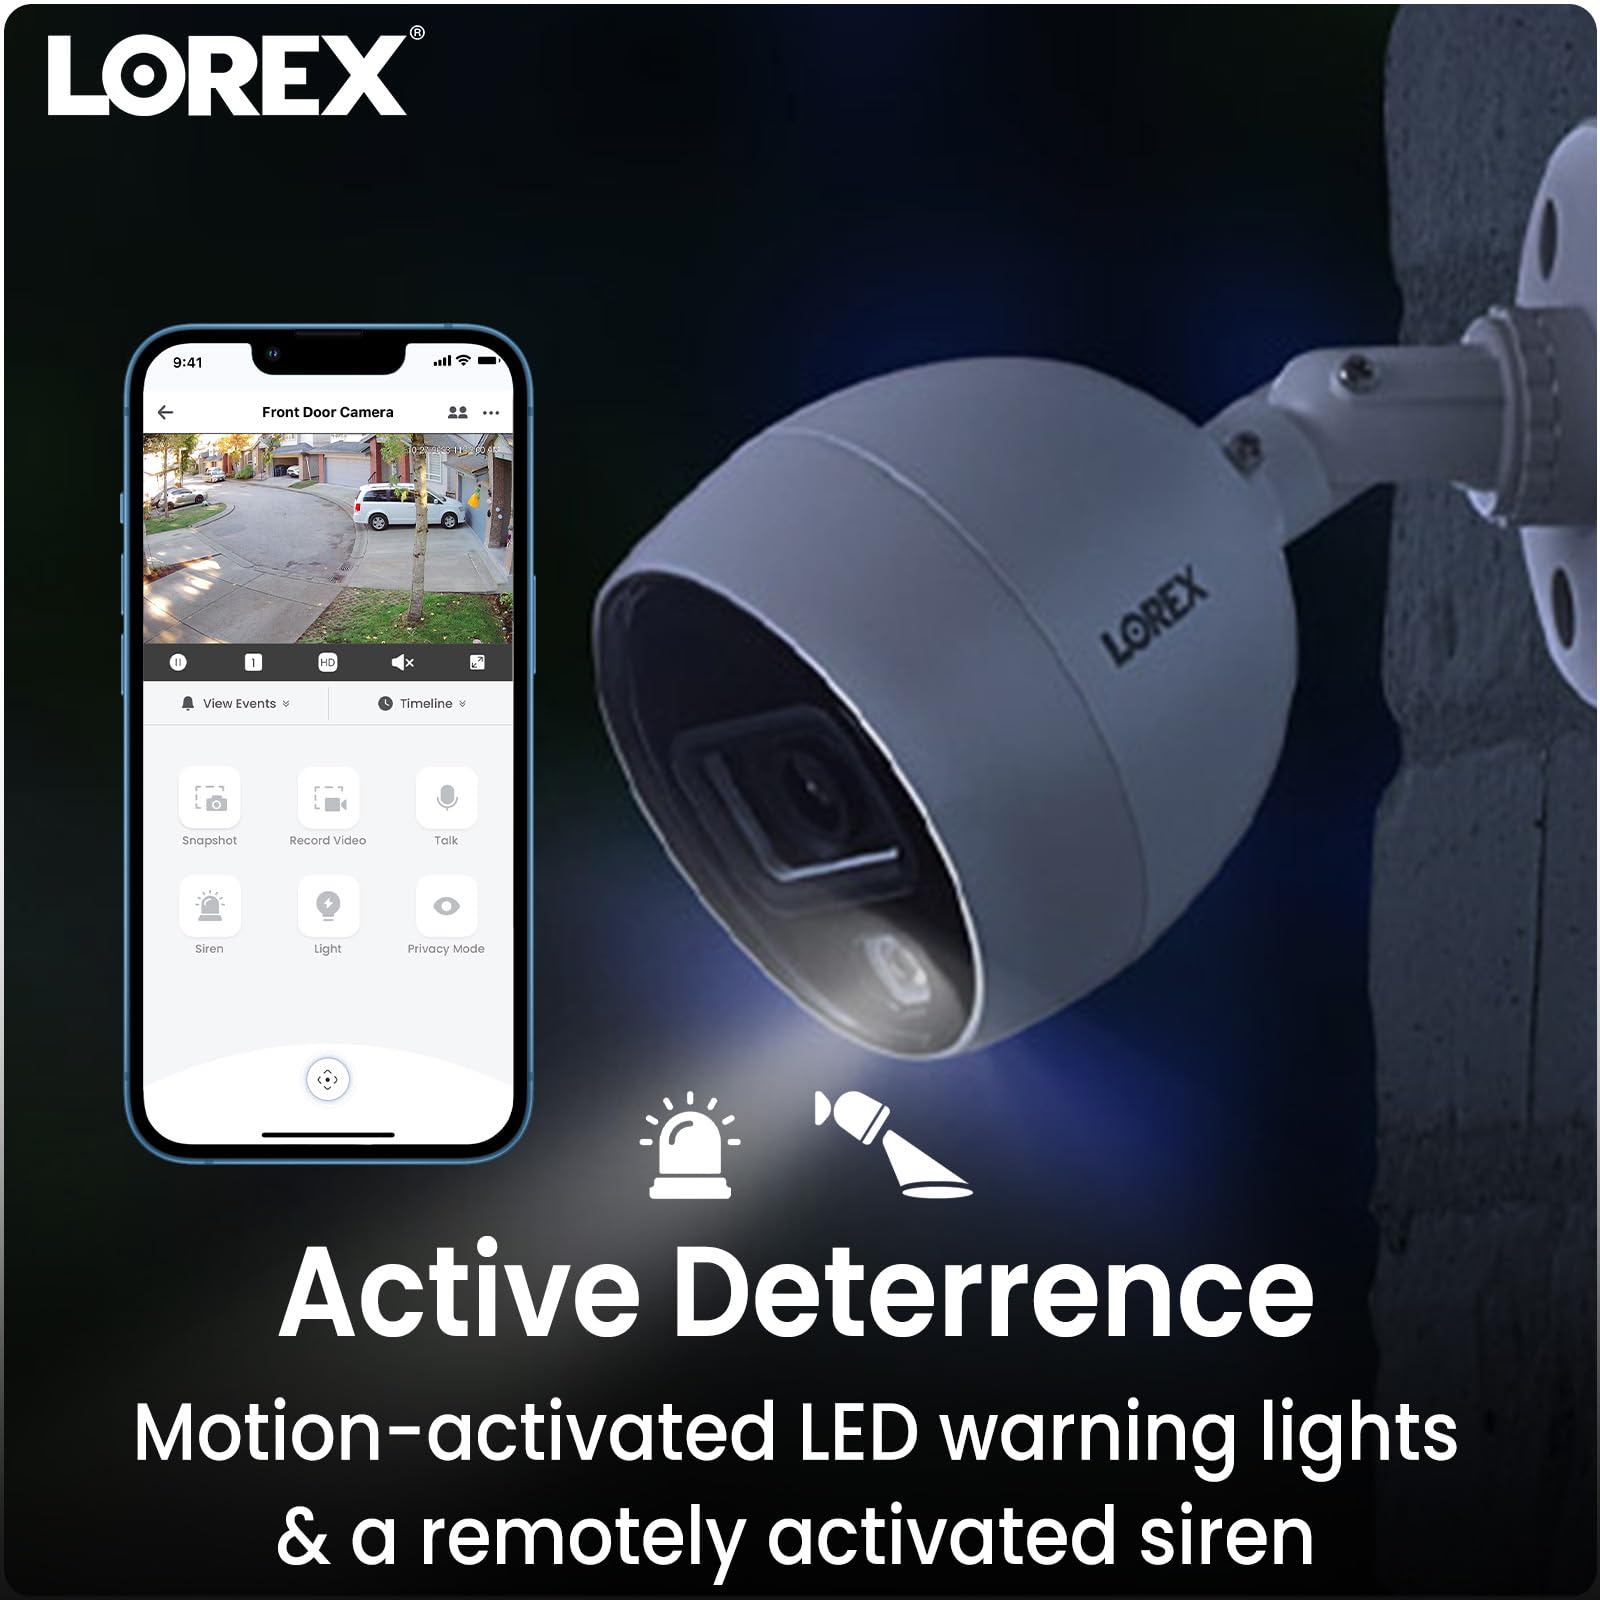 Lorex Fusion 4K Security Camera System w 2TB DVR - 8 Channel Wired Home Security w/ 6 Cameras - Motion & Face Detection, Warning Light & Siren, Color Night Vision, Weatherproof Surveillance